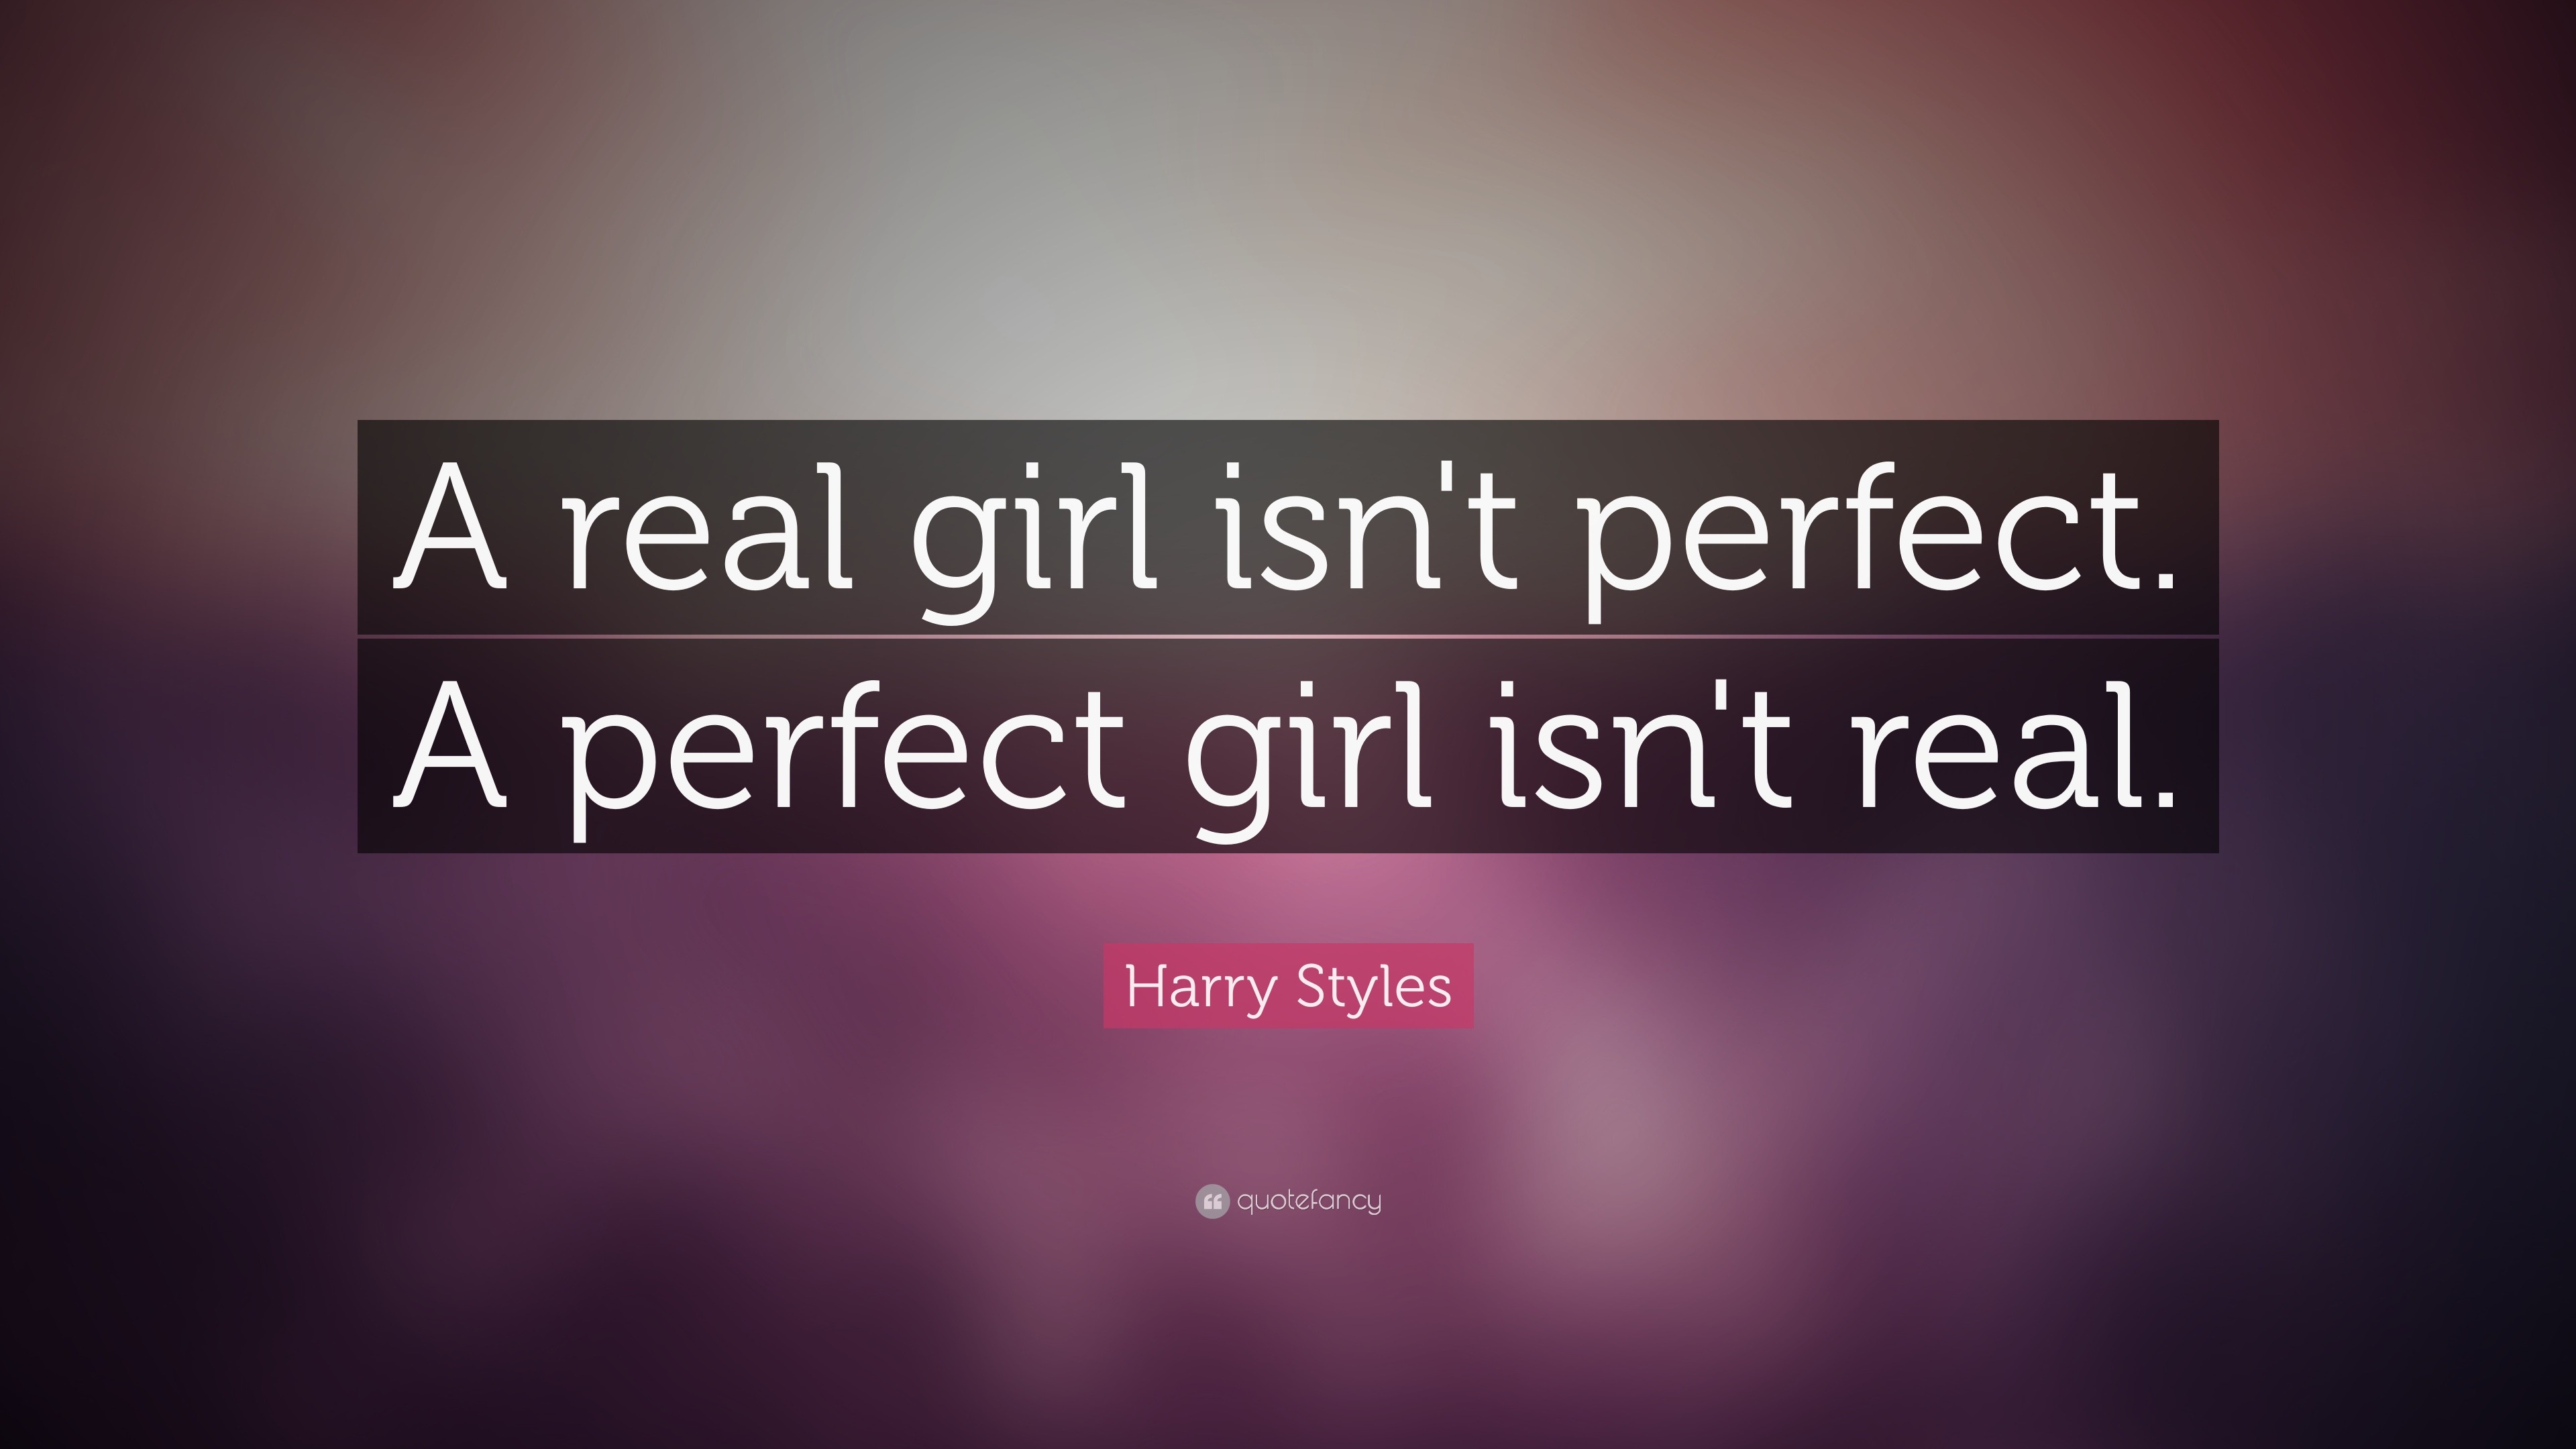 Harry Styles Quote “A real girl isn t perfect A perfect girl